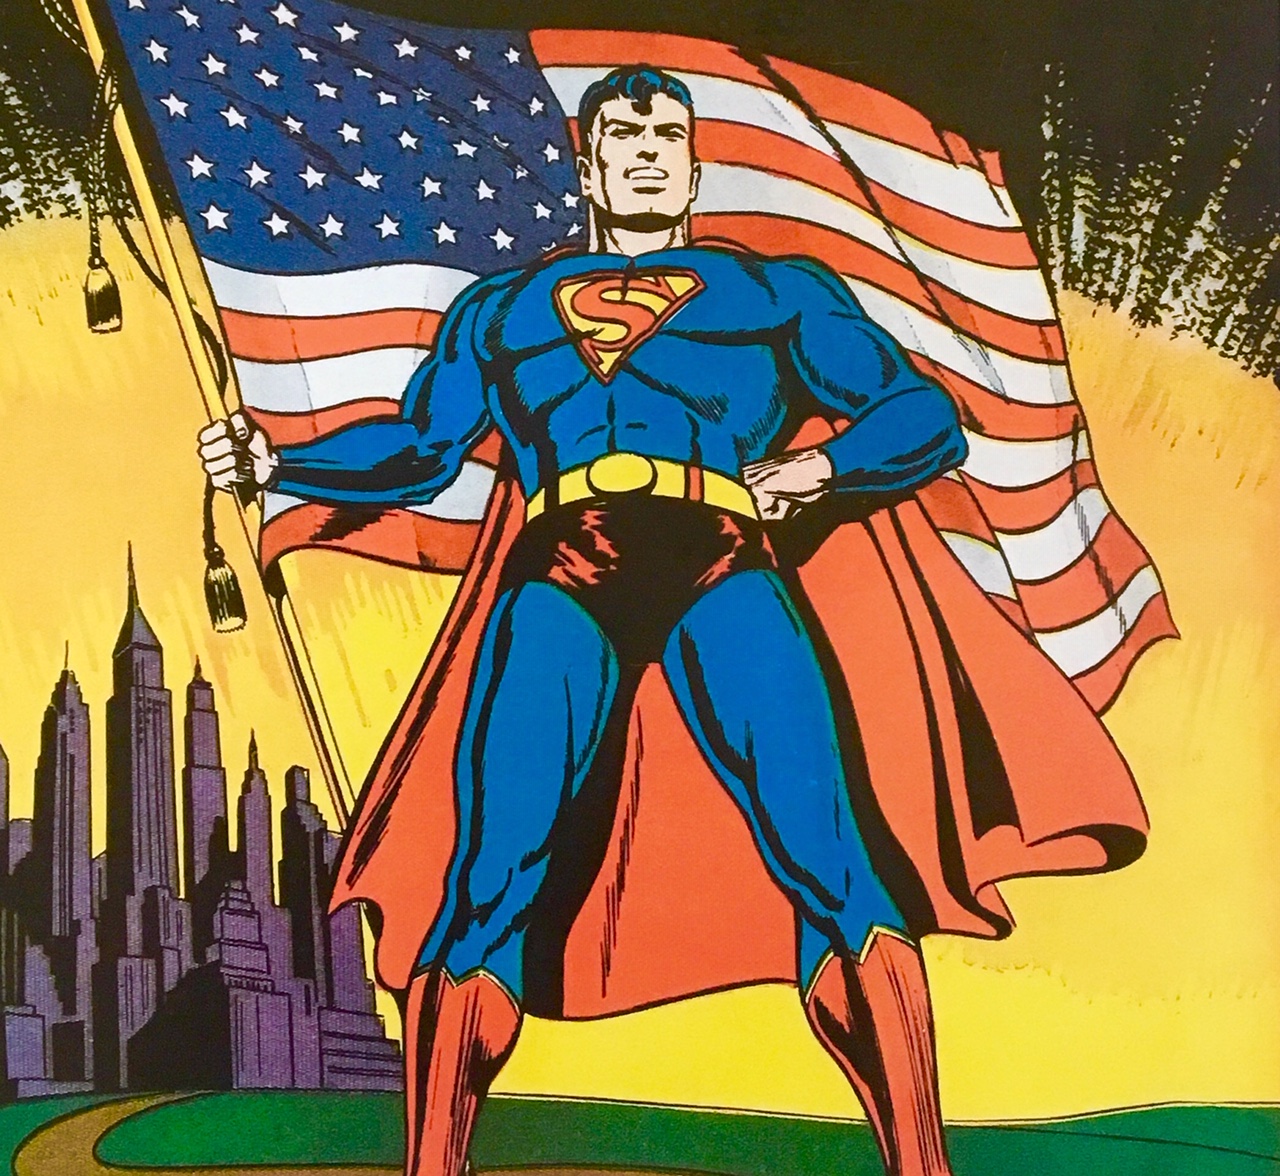 Fighting the never ending battle for Truth, Justice and the American Way!